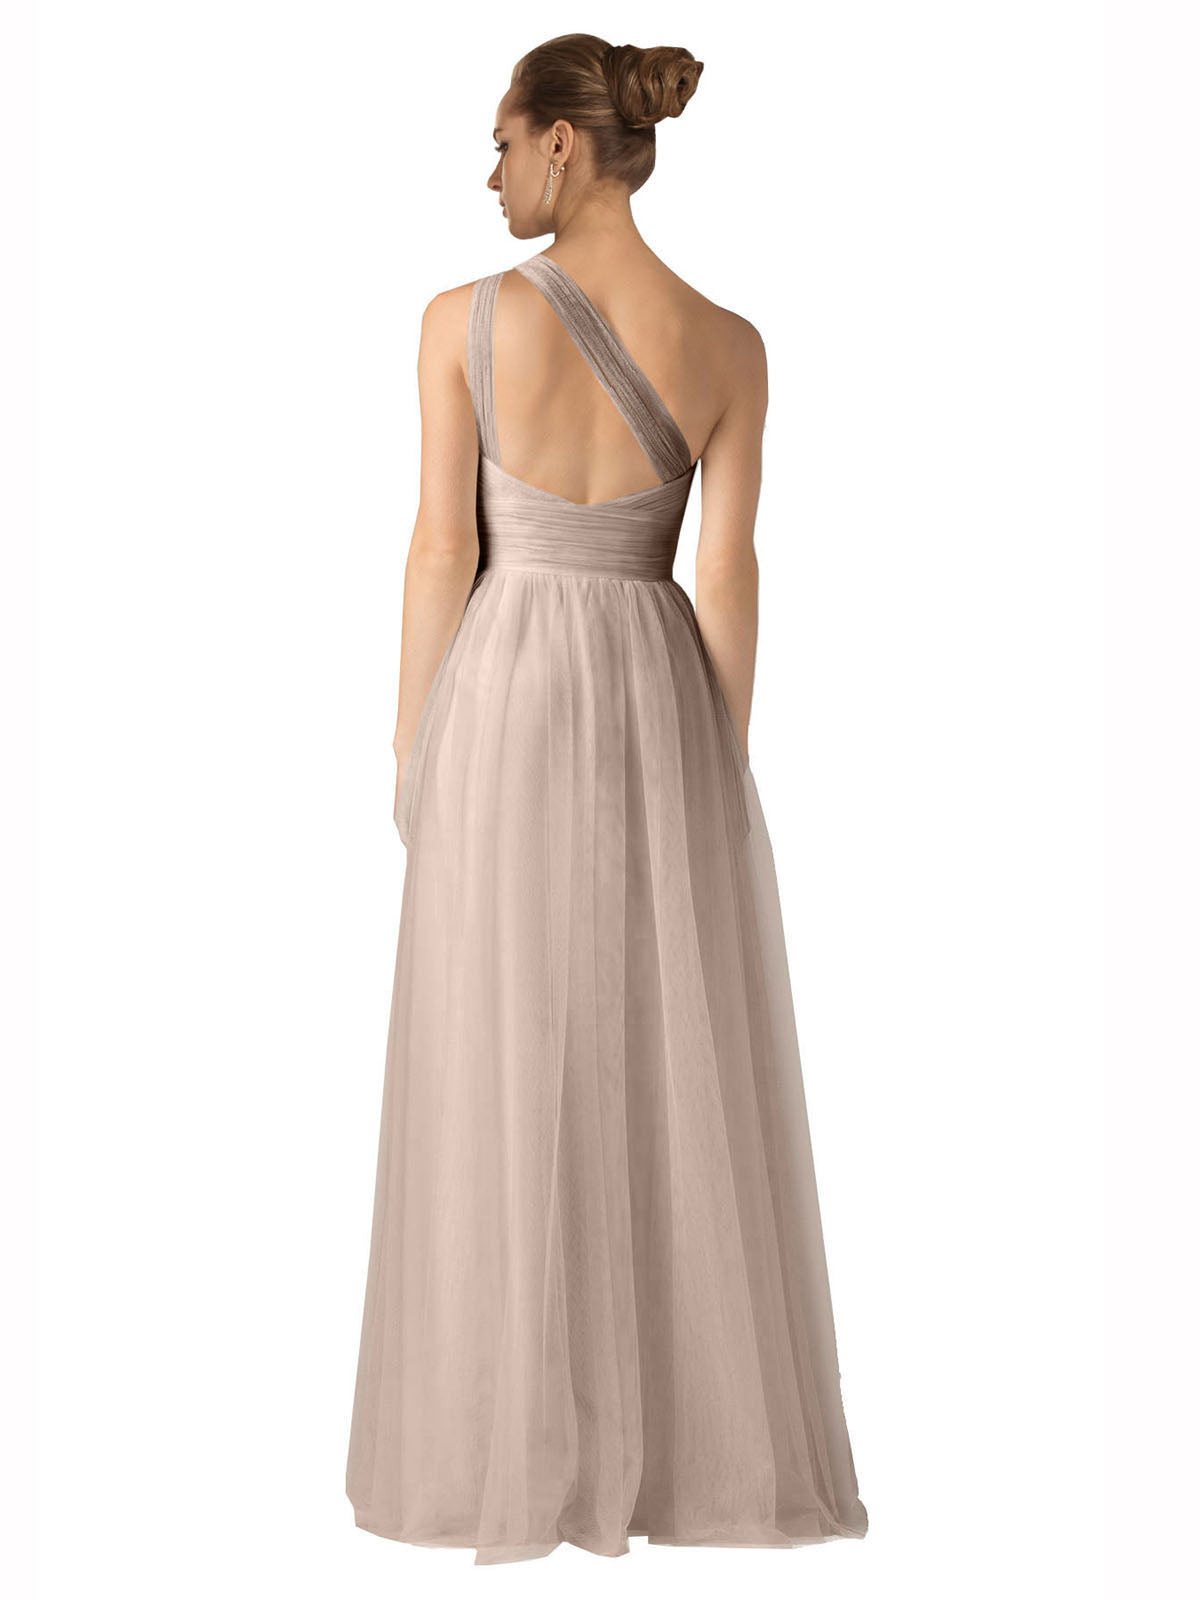 Long A-Line One Shoulder Sleeveless Tulle Nude Bridesmaid Dress Saige